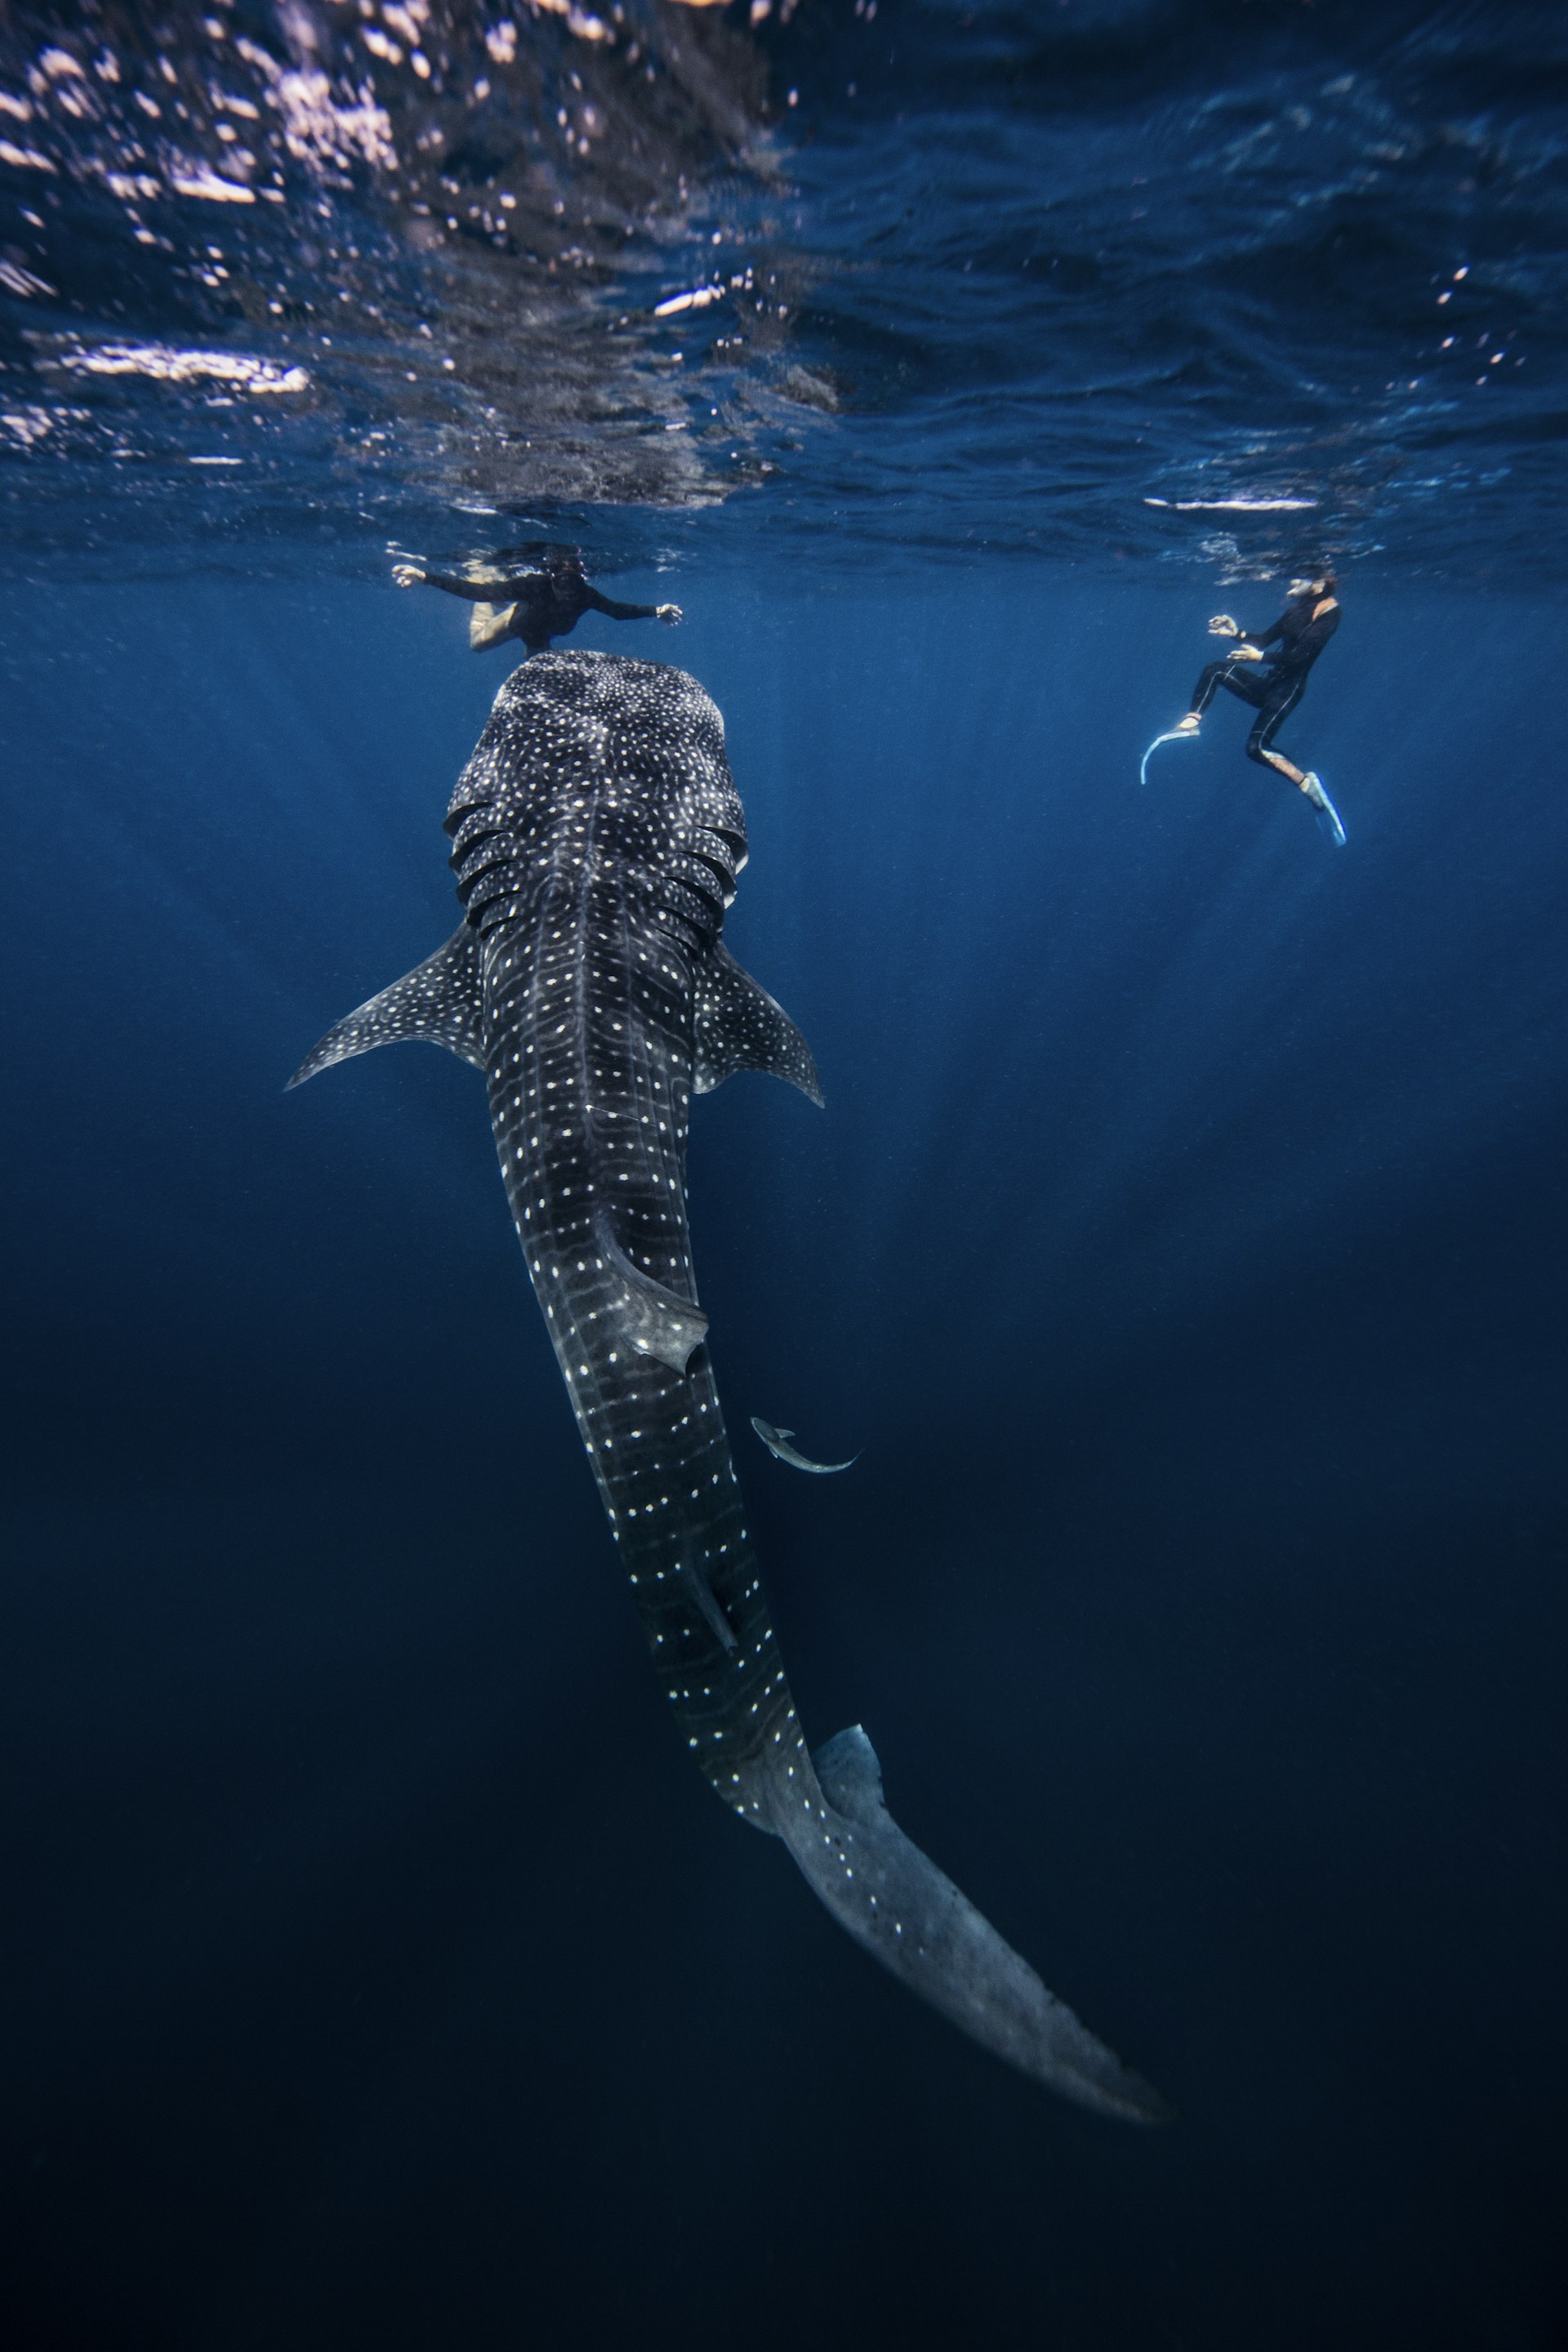 A huge beast swims along underwater. It is a dark colour with lighter spots. Two divers are watching on from a distance